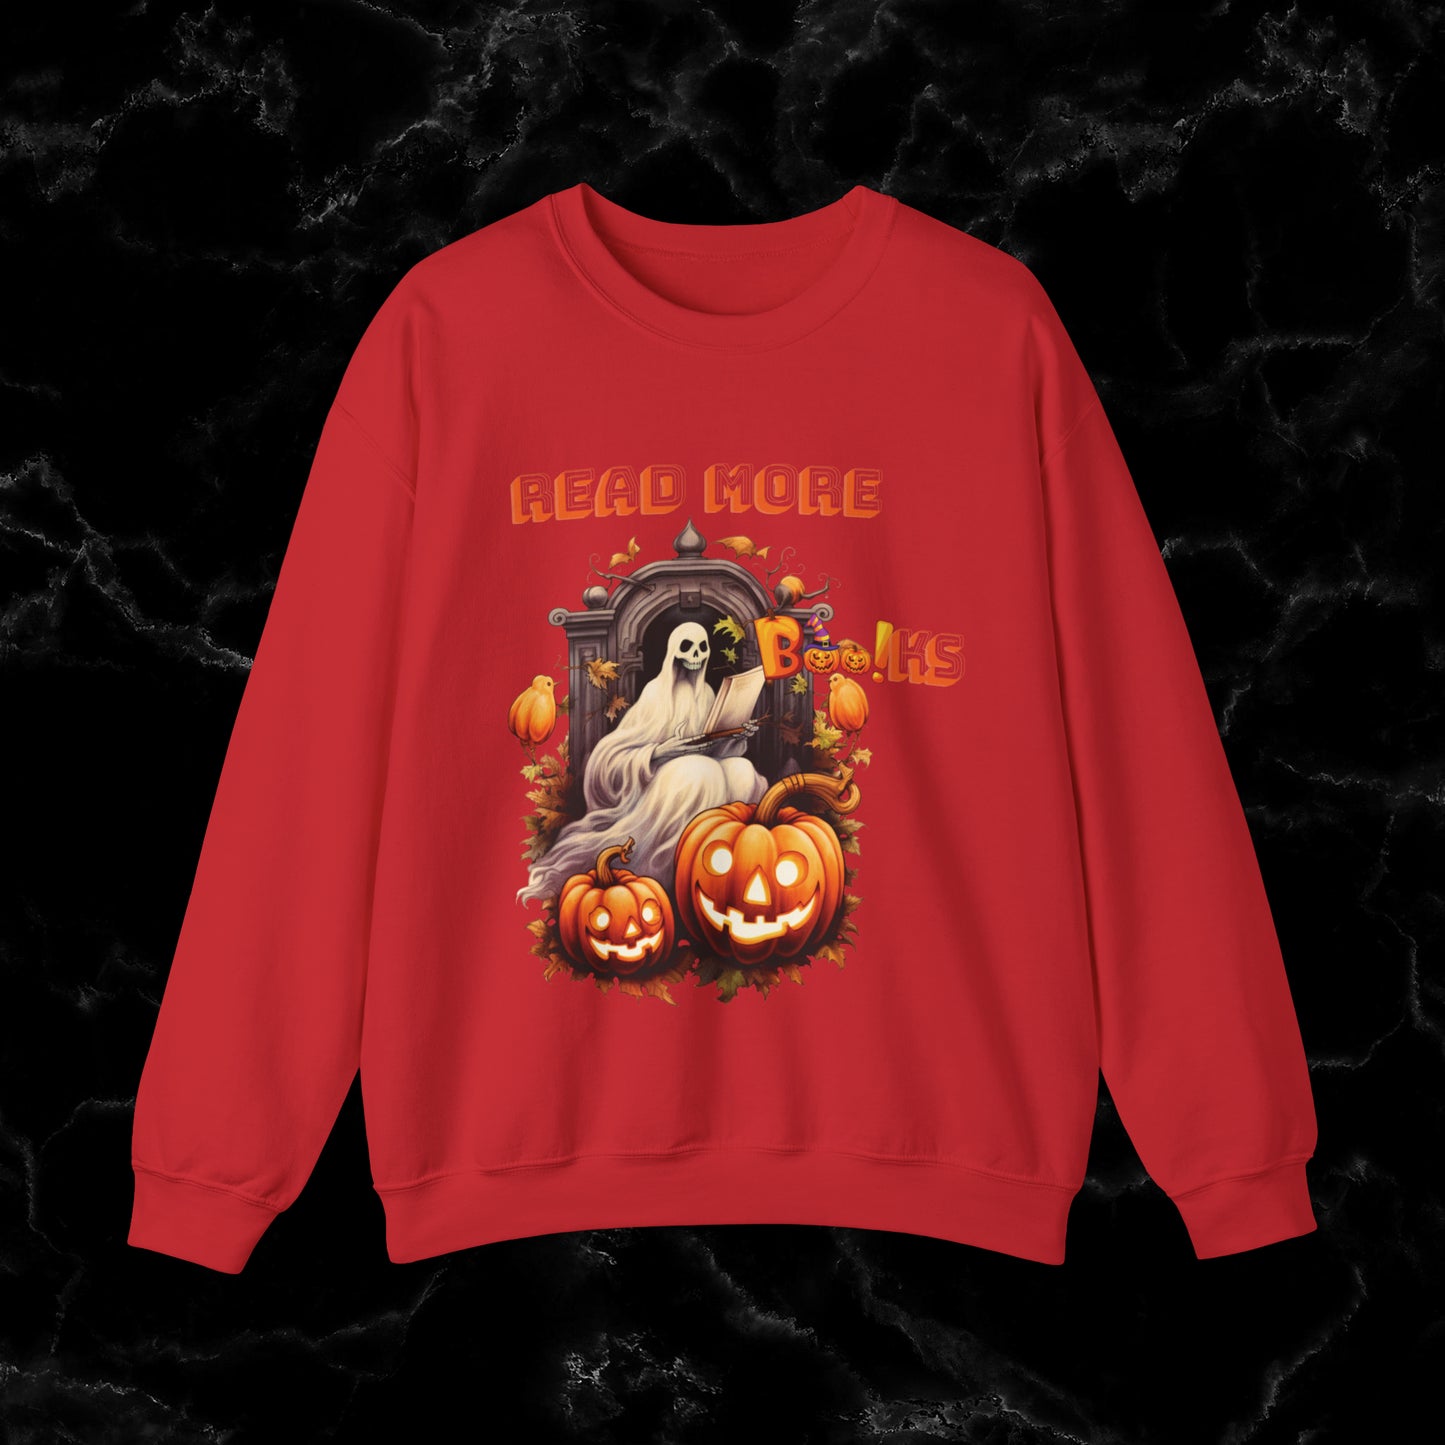 Read More Books Sweatshirt - Book Lover Halloween Sweater for Librarians and Students Sweatshirt S Red 